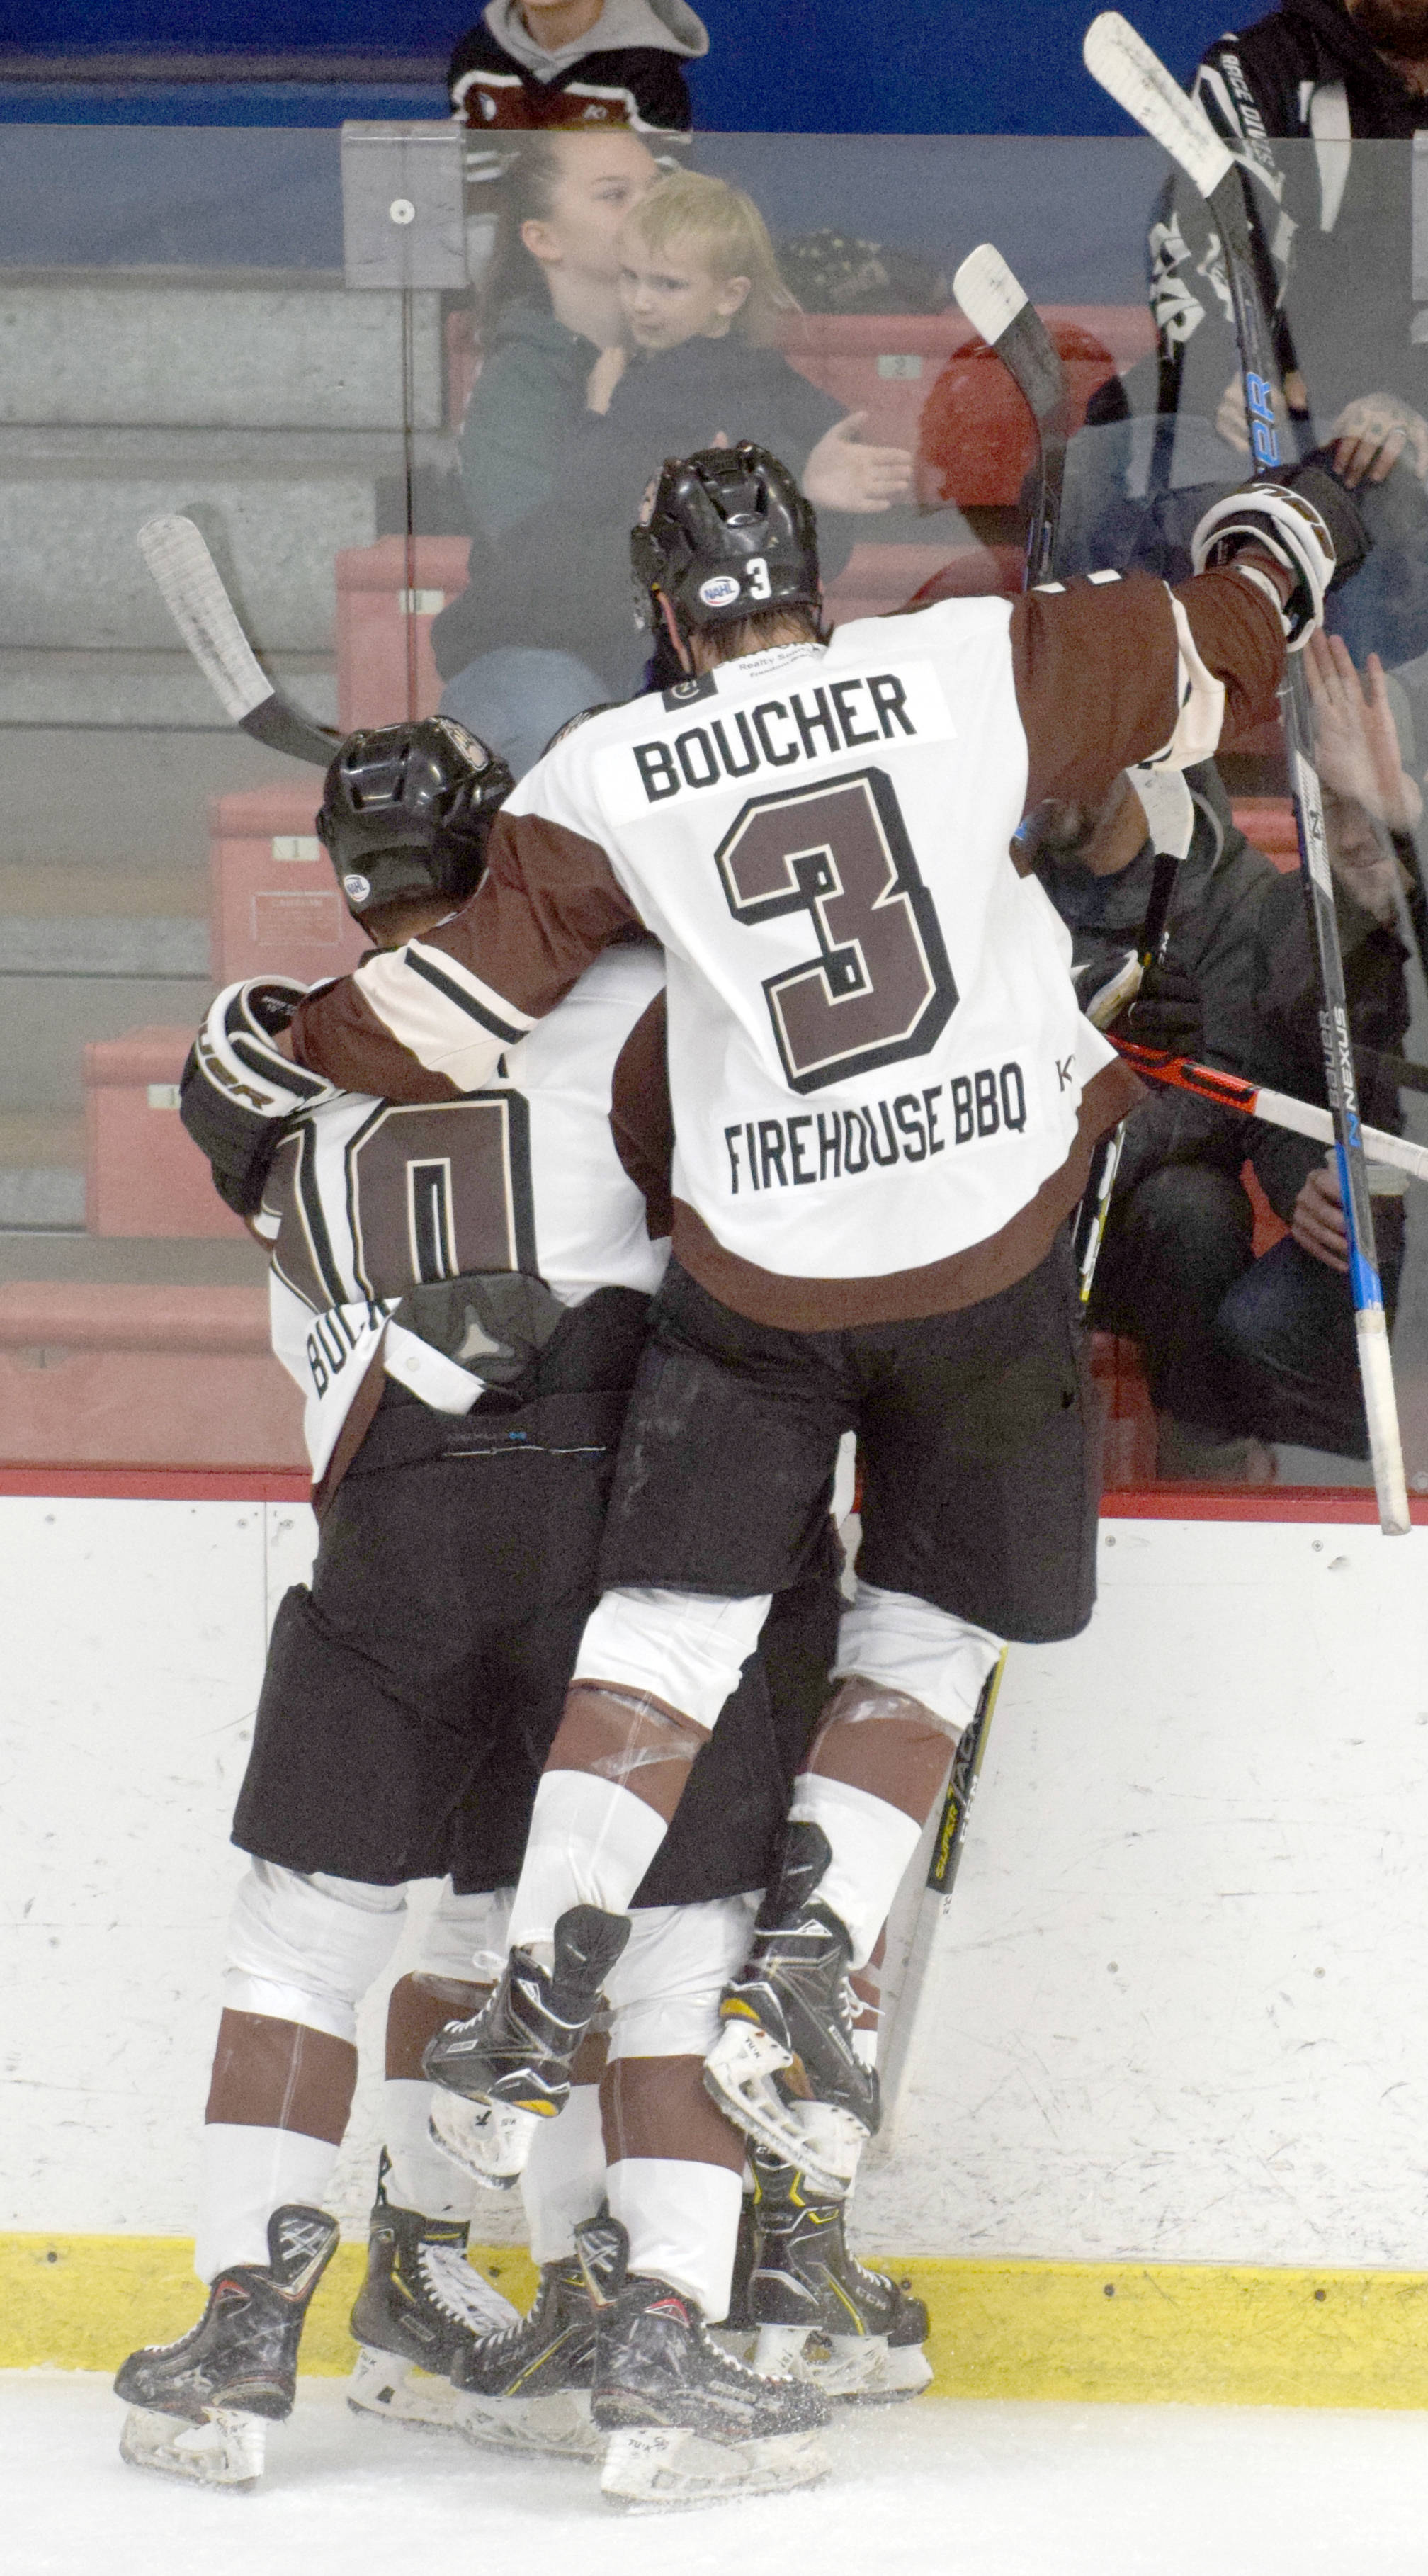 JJ Boucher jumps on teammates to celebrate Max Helgeson’s goal in the first period against the Janesville (Wisconsin) Jets on Friday, Oct. 21, 2019, at the Soldotna Regional Sports Complex in Soldotna, Alaska. (Photo by Jeff Helminiak/Peninsula Clarion)